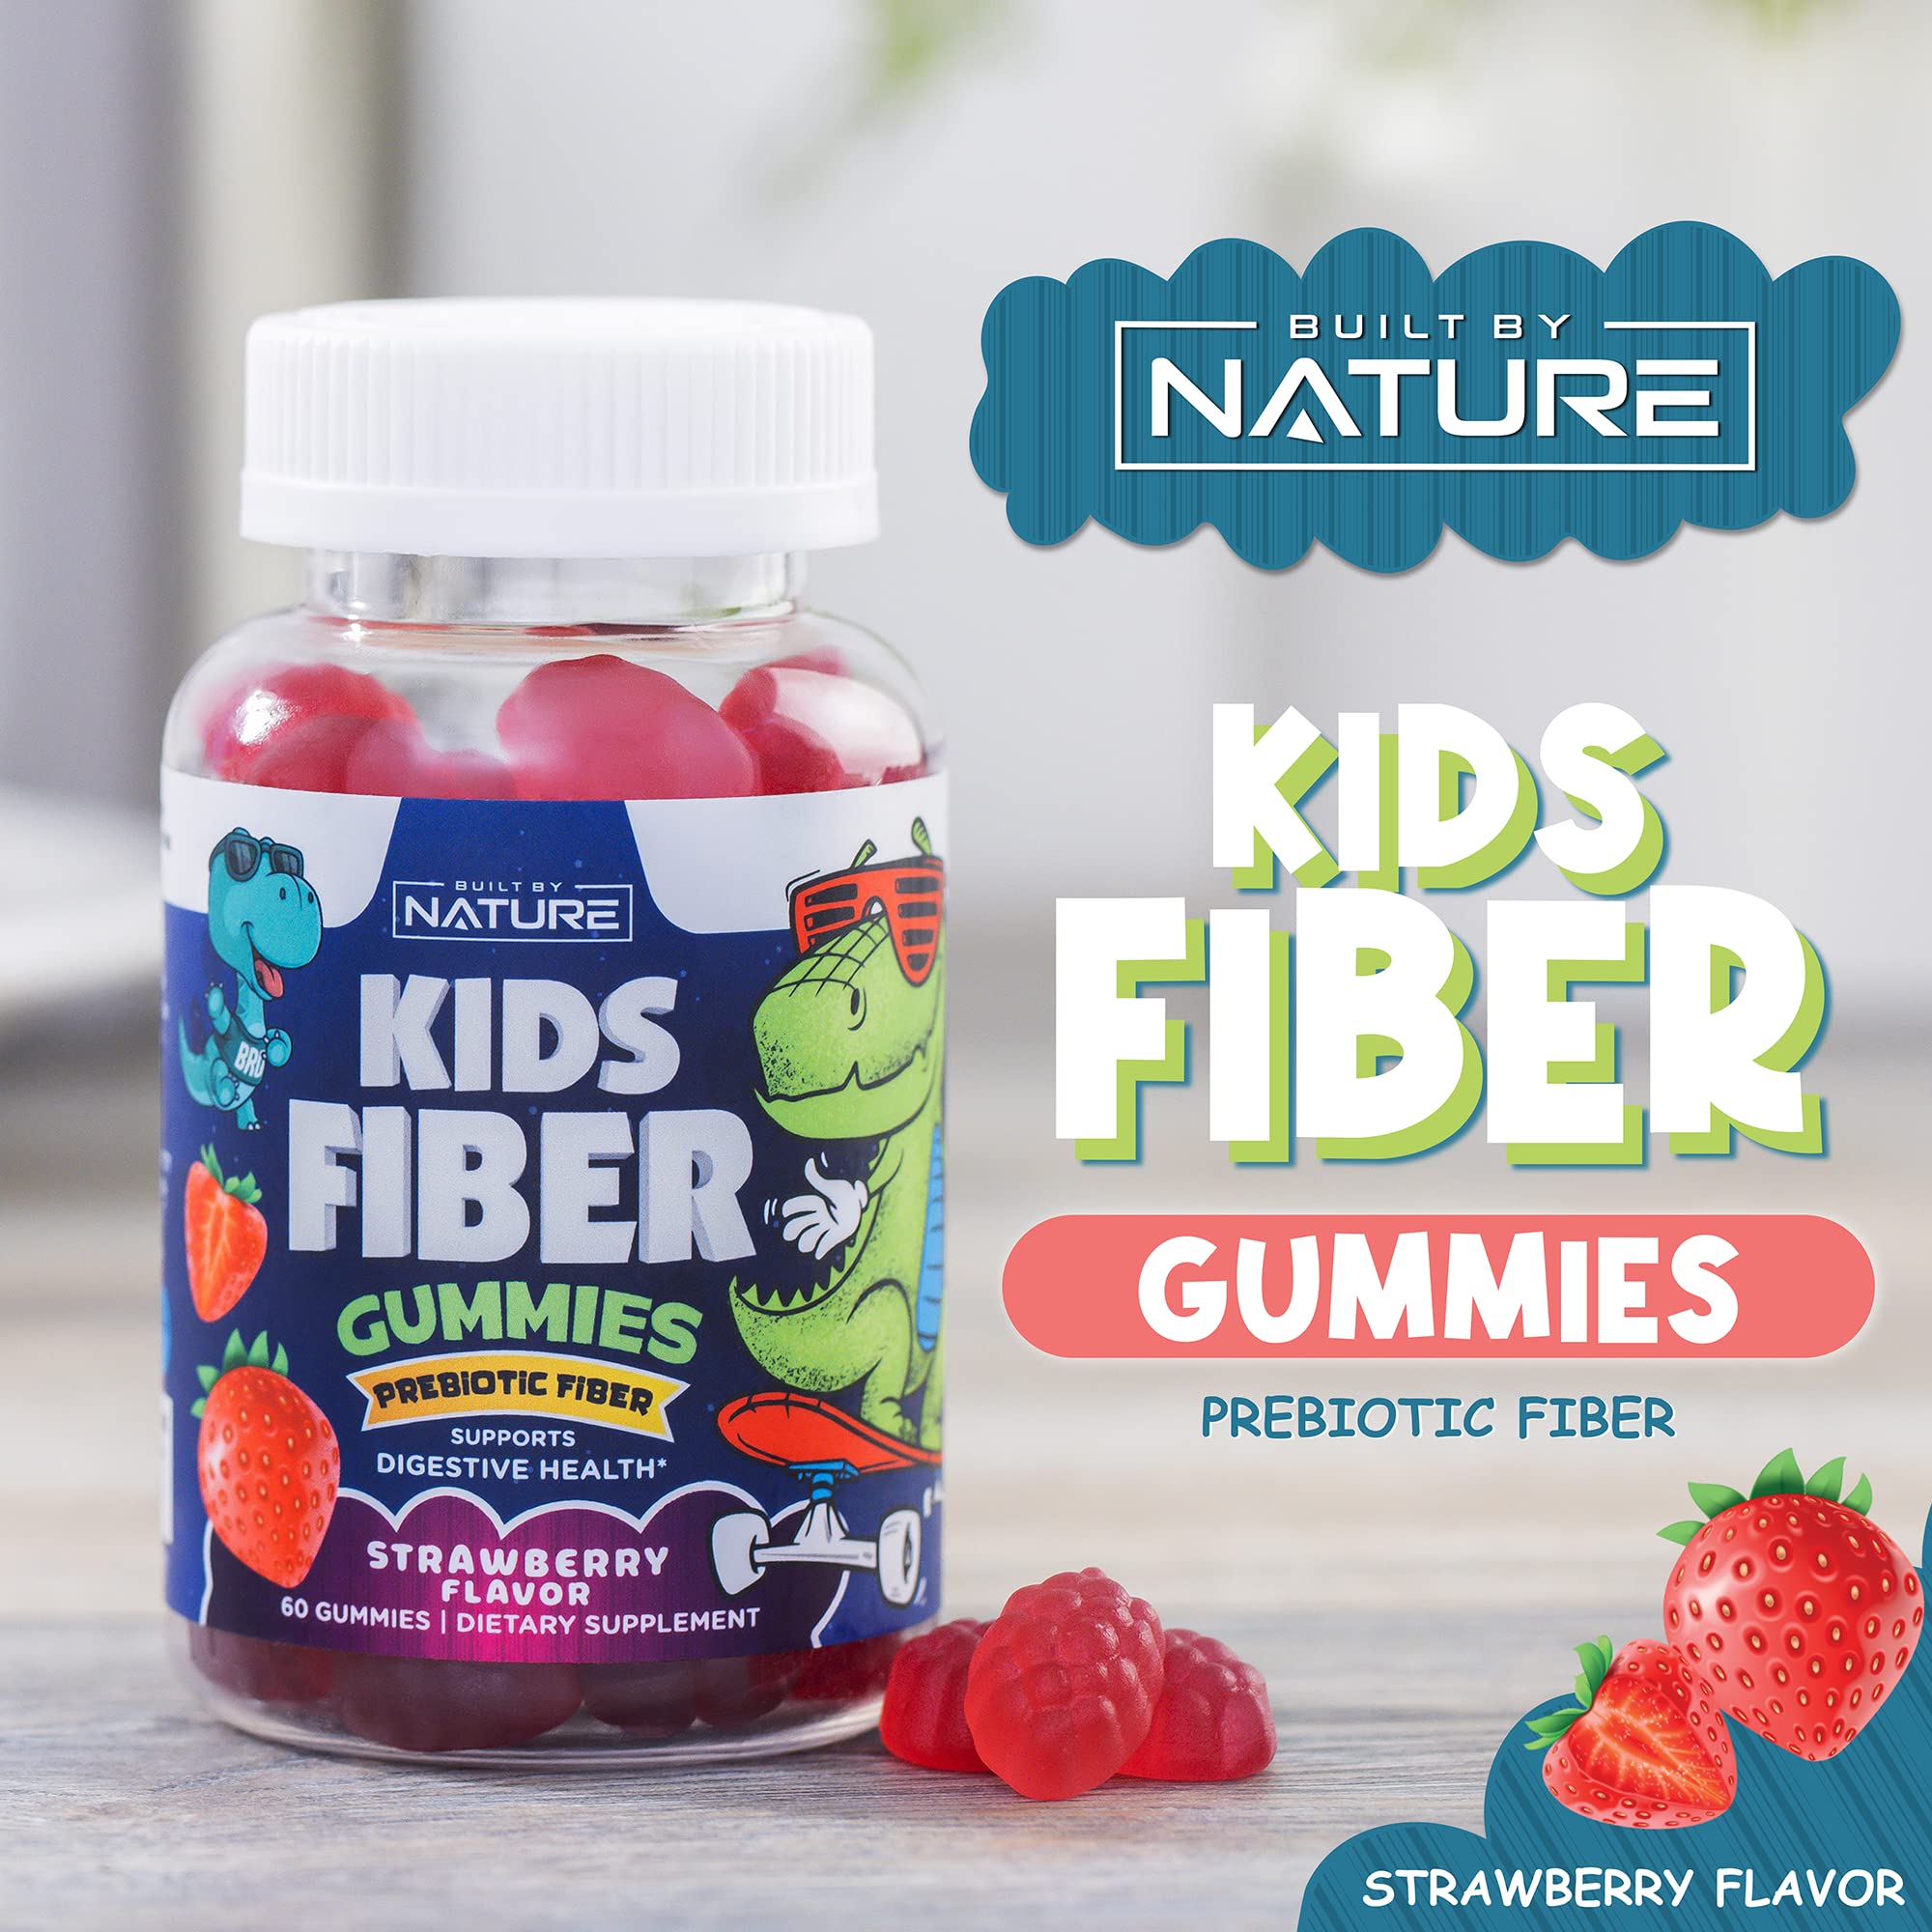 Kids Fiber Gummies, Daily Chicory Root Fiber Supplement, Plant Based, Non-GMO, for Digestive and Intestinal Gut Health, Low Sugar Prebiotic Fiber Gummy for Children, Strawberry Flavored, 60 Gummies